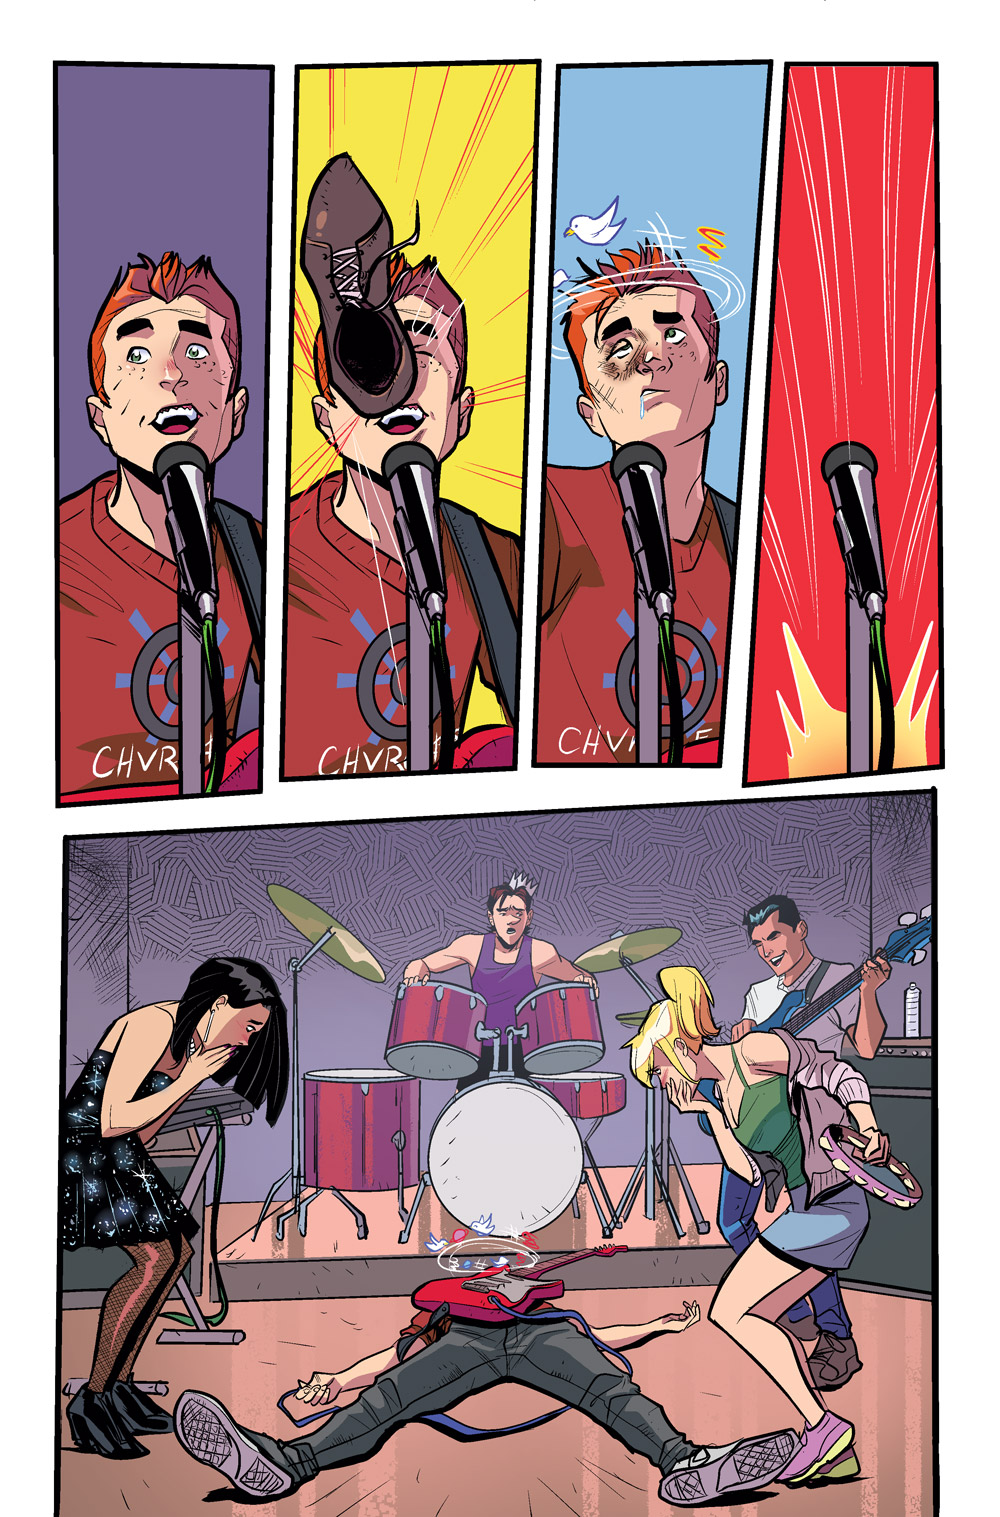 The Archies meet The Monkees in this early preview of THE ARCHIES #4 by  Segura, Rosenberg, and Eisma! - Archie Comics